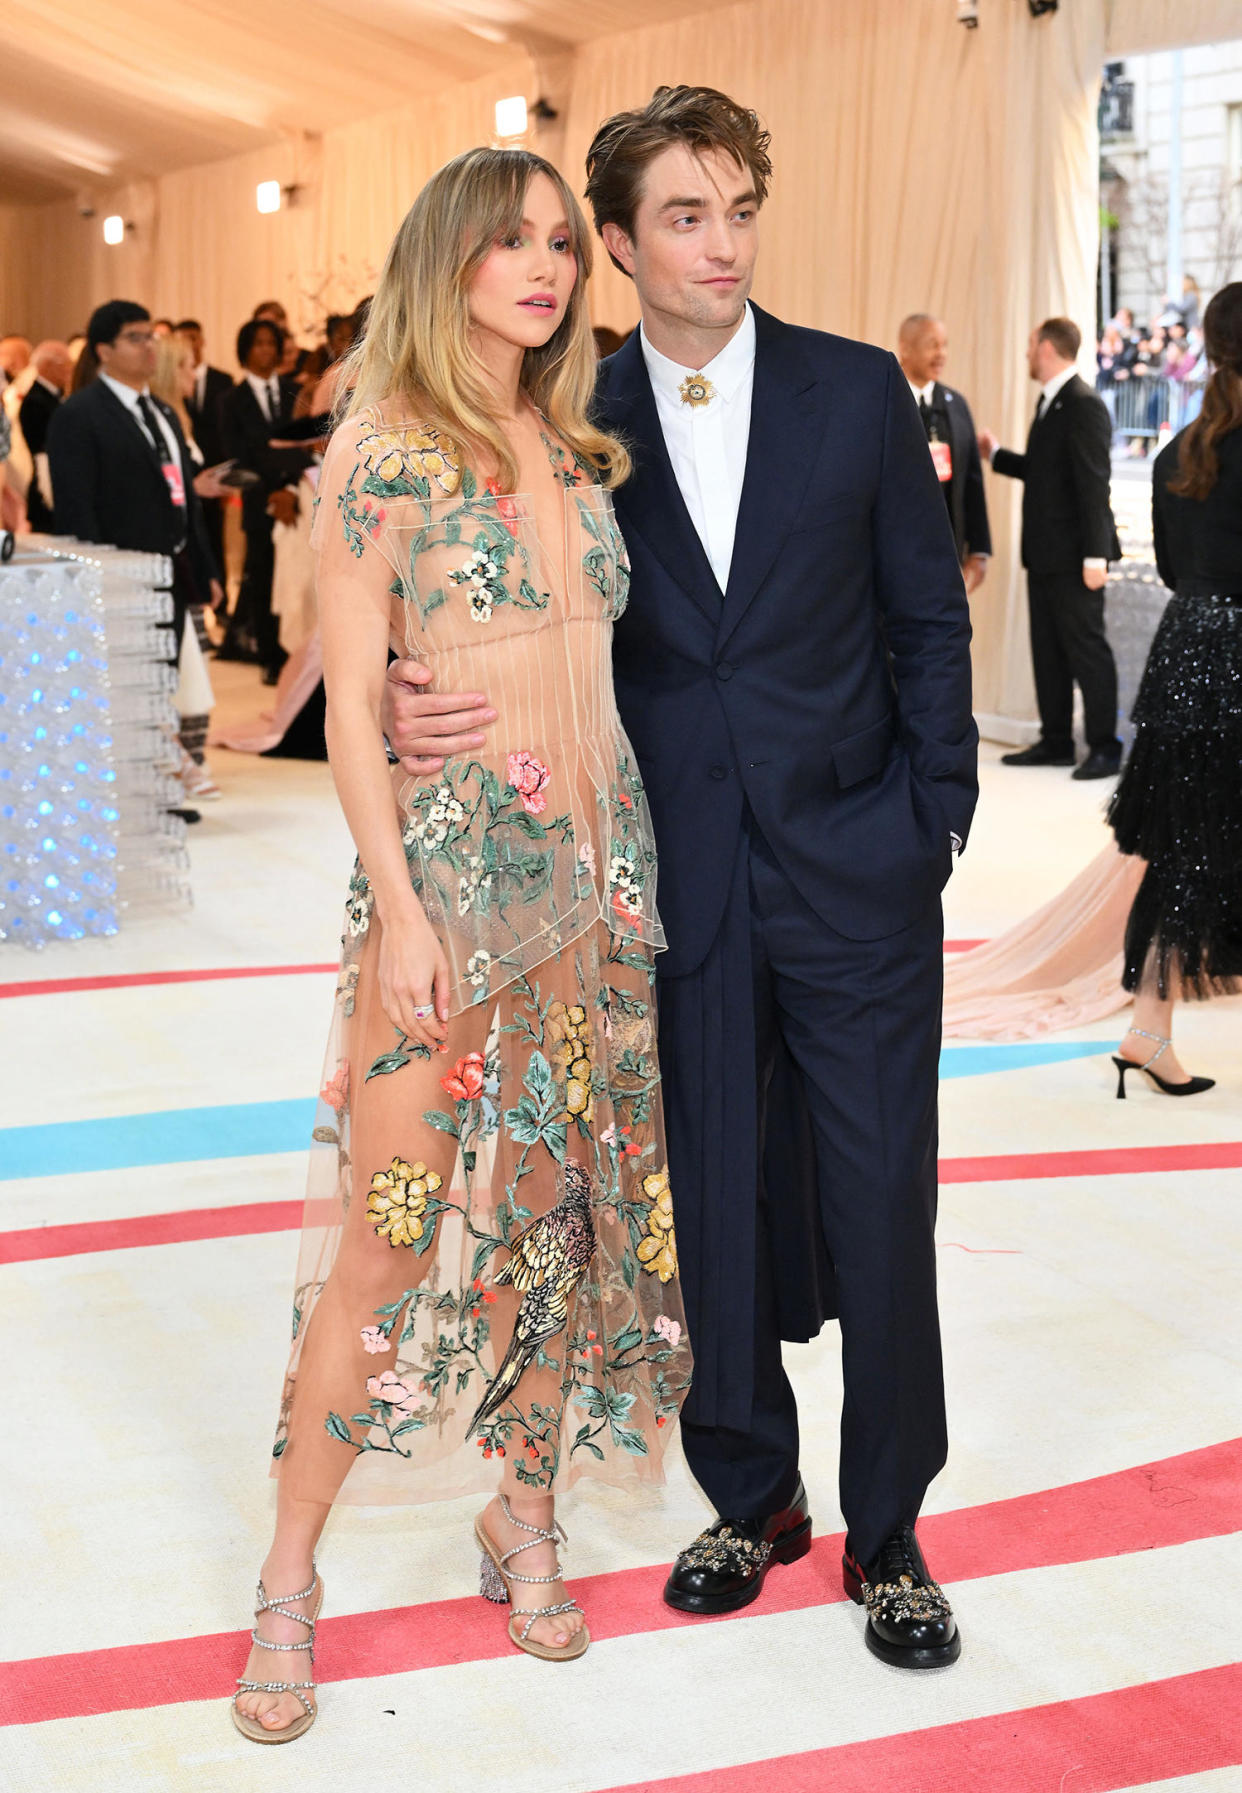 Robert Pattinson and Suki Waterhouse at the 2023 Met Gala on May 1, 2023 in NYC. (Angela Weiss / Getty Images)